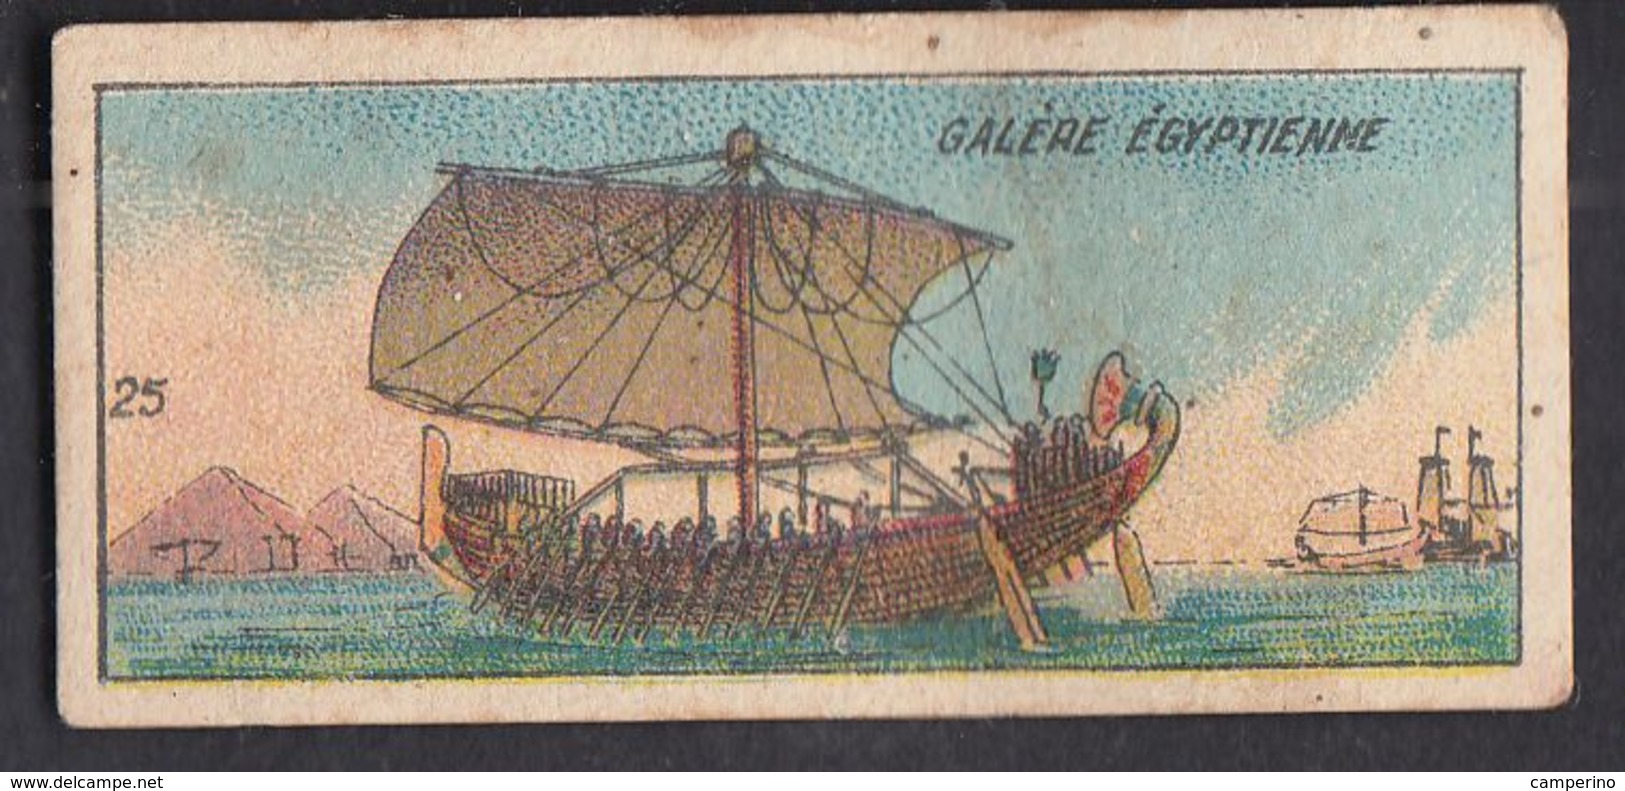 Galère Egyptienne Barque Navire Ancienne Petite Chromos Collectible Card Victoria - Victoria